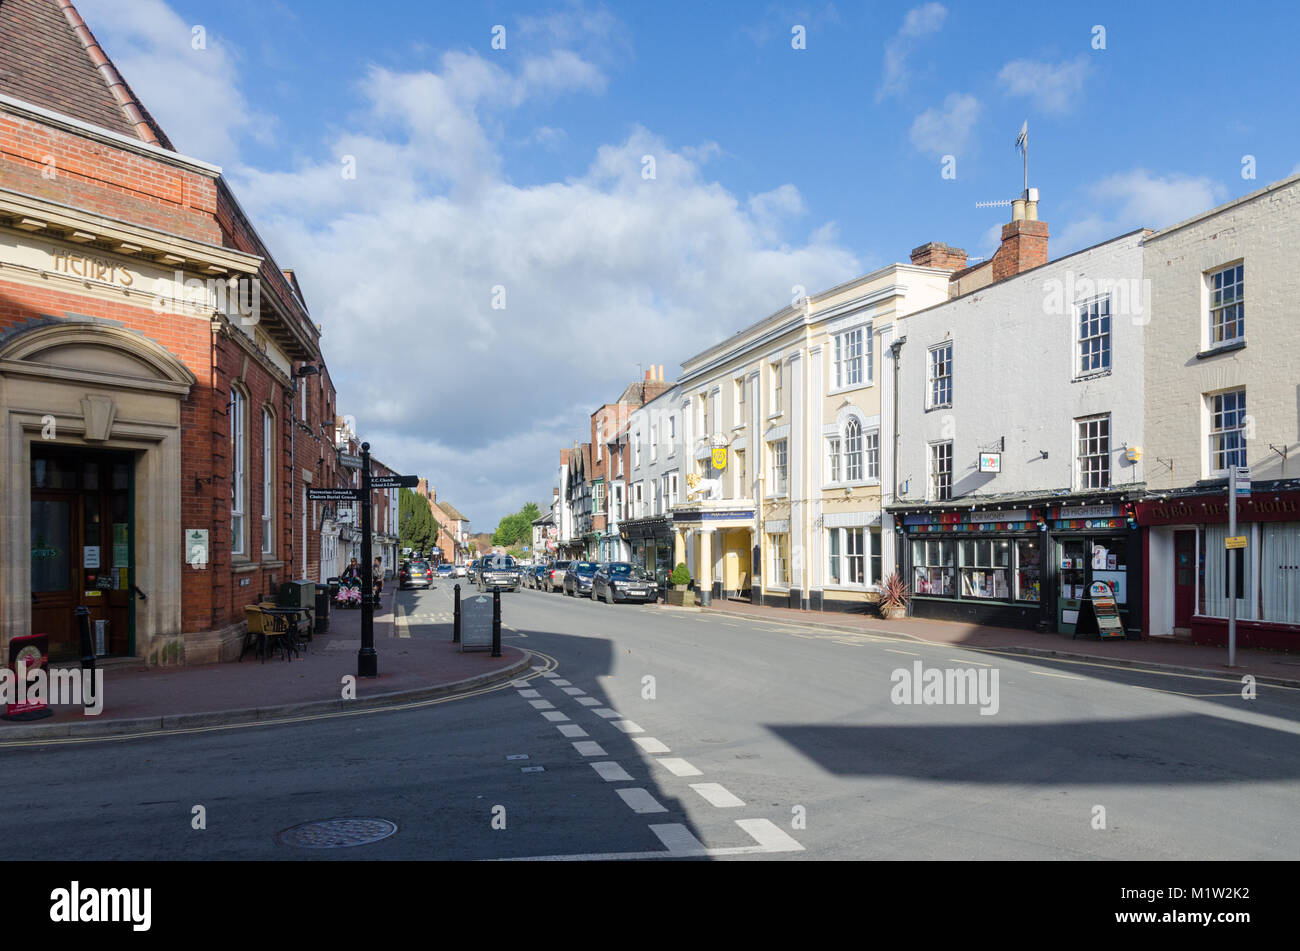 View of High Street in the Worcestershire town of Upton upon Severn Stock Photo